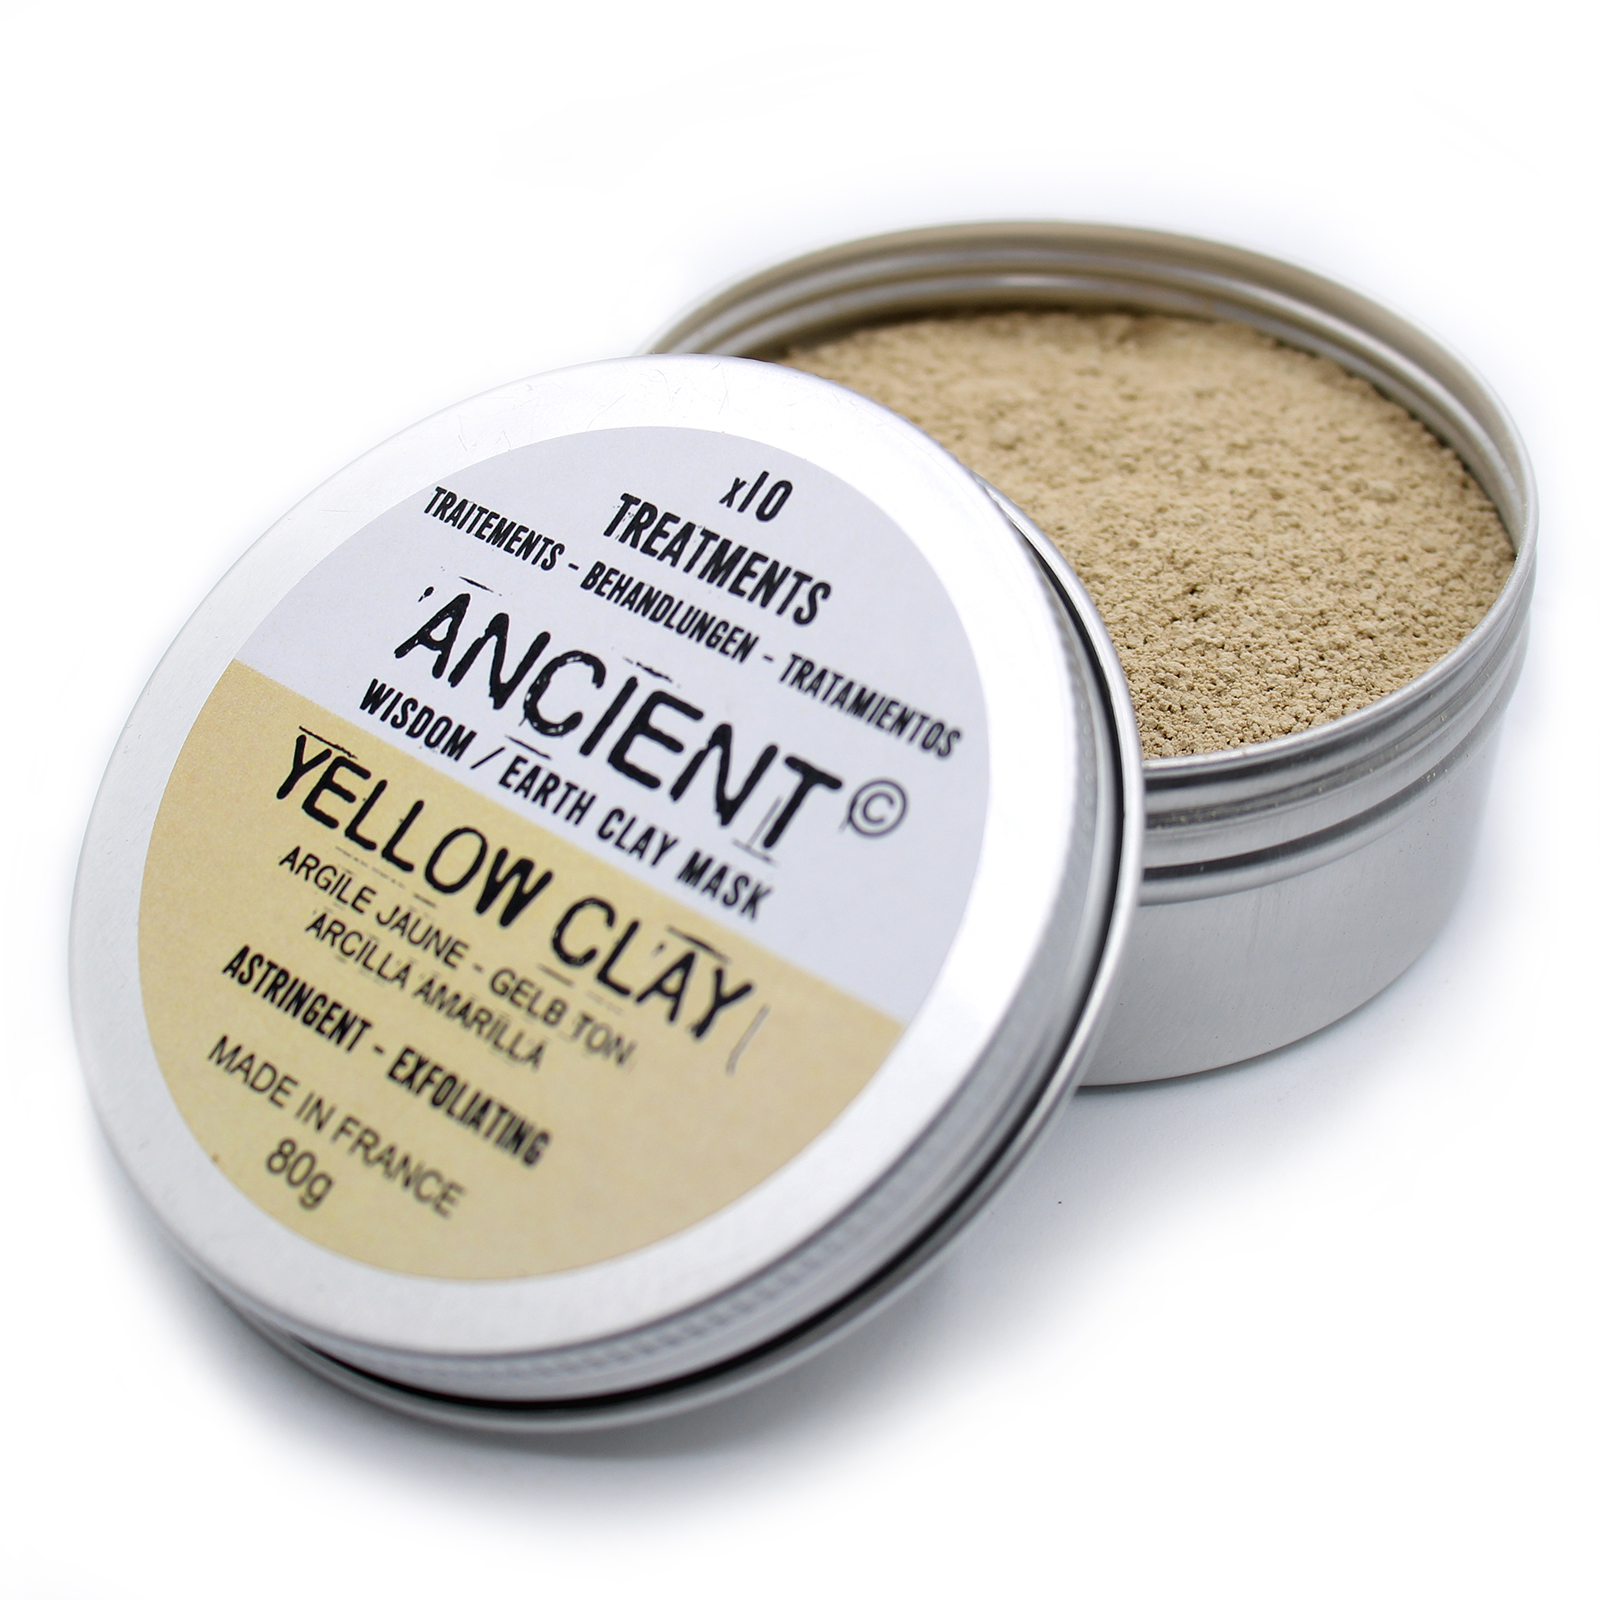 Yellow Clay Mask 80g